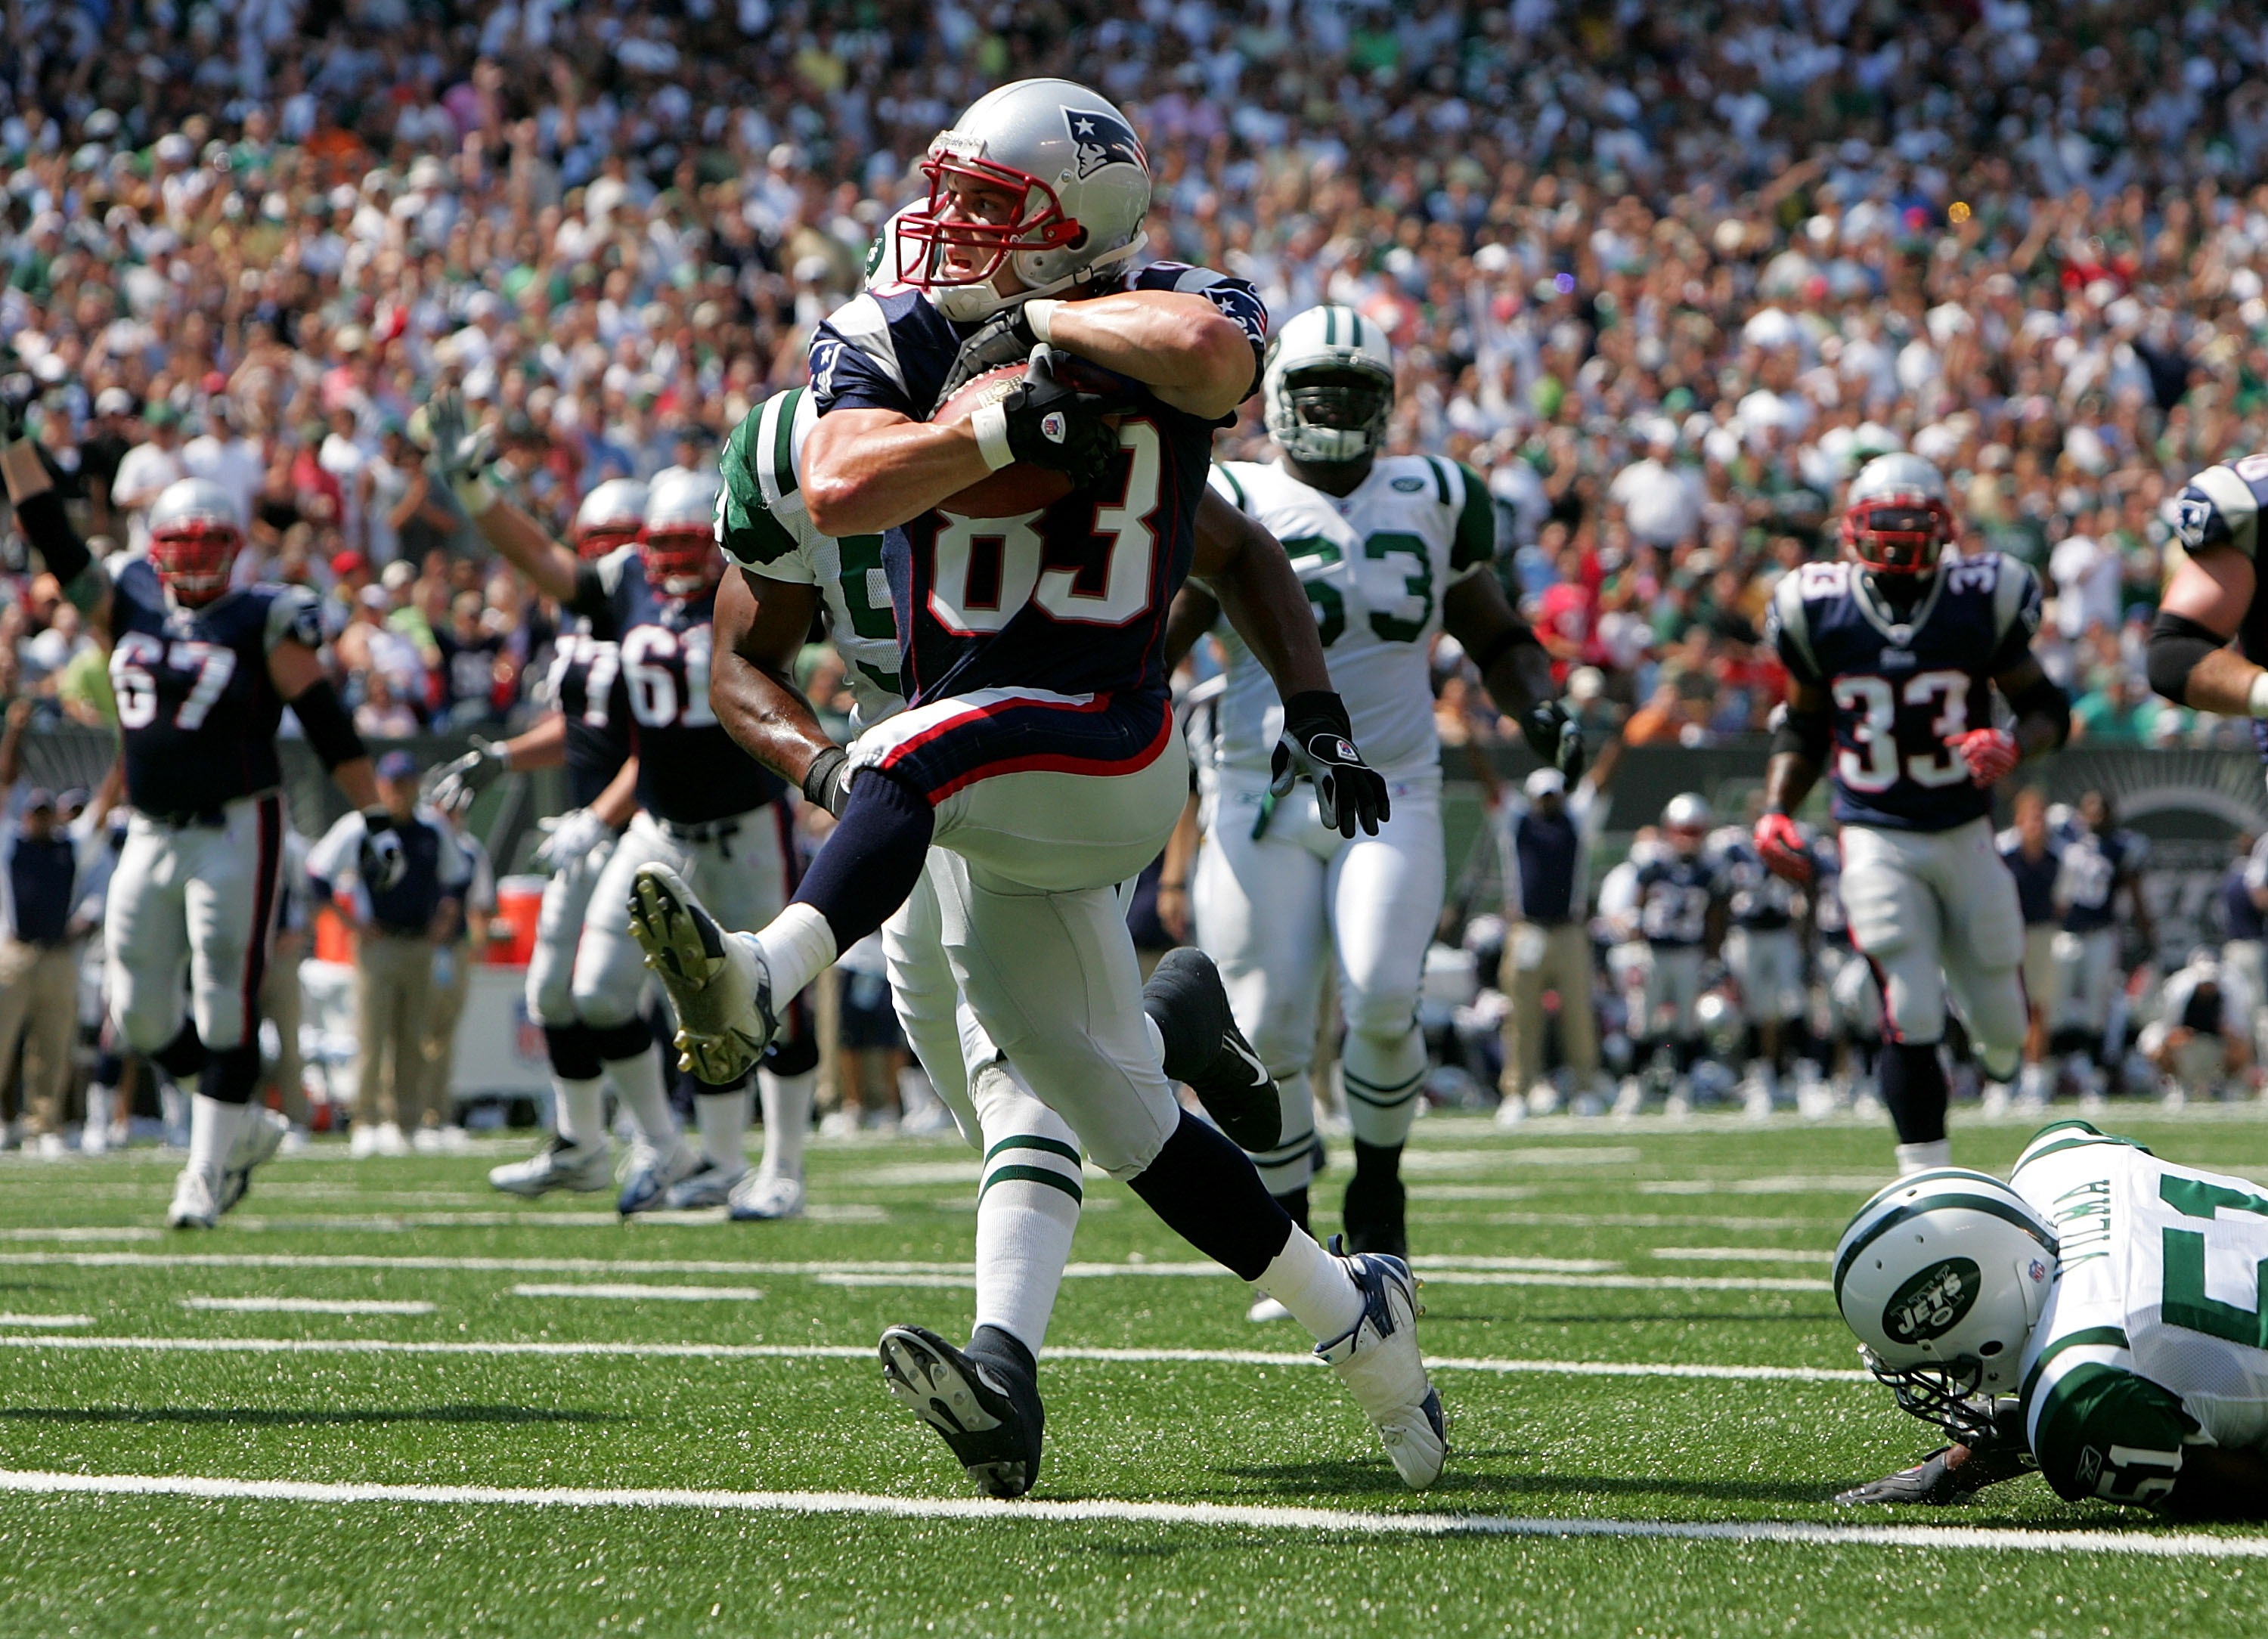 EAST RUTHERFORD, NJ - SEPTEMBER 09:  Wes Welker #83 of  the New England Patriots runs in a touchdown in the first quarter agaisnt the New York Jets on September 9, 2007 at Giants Stadium in East Rutherford, New Jersey.  (Photo by Nick Laham/Getty Images)